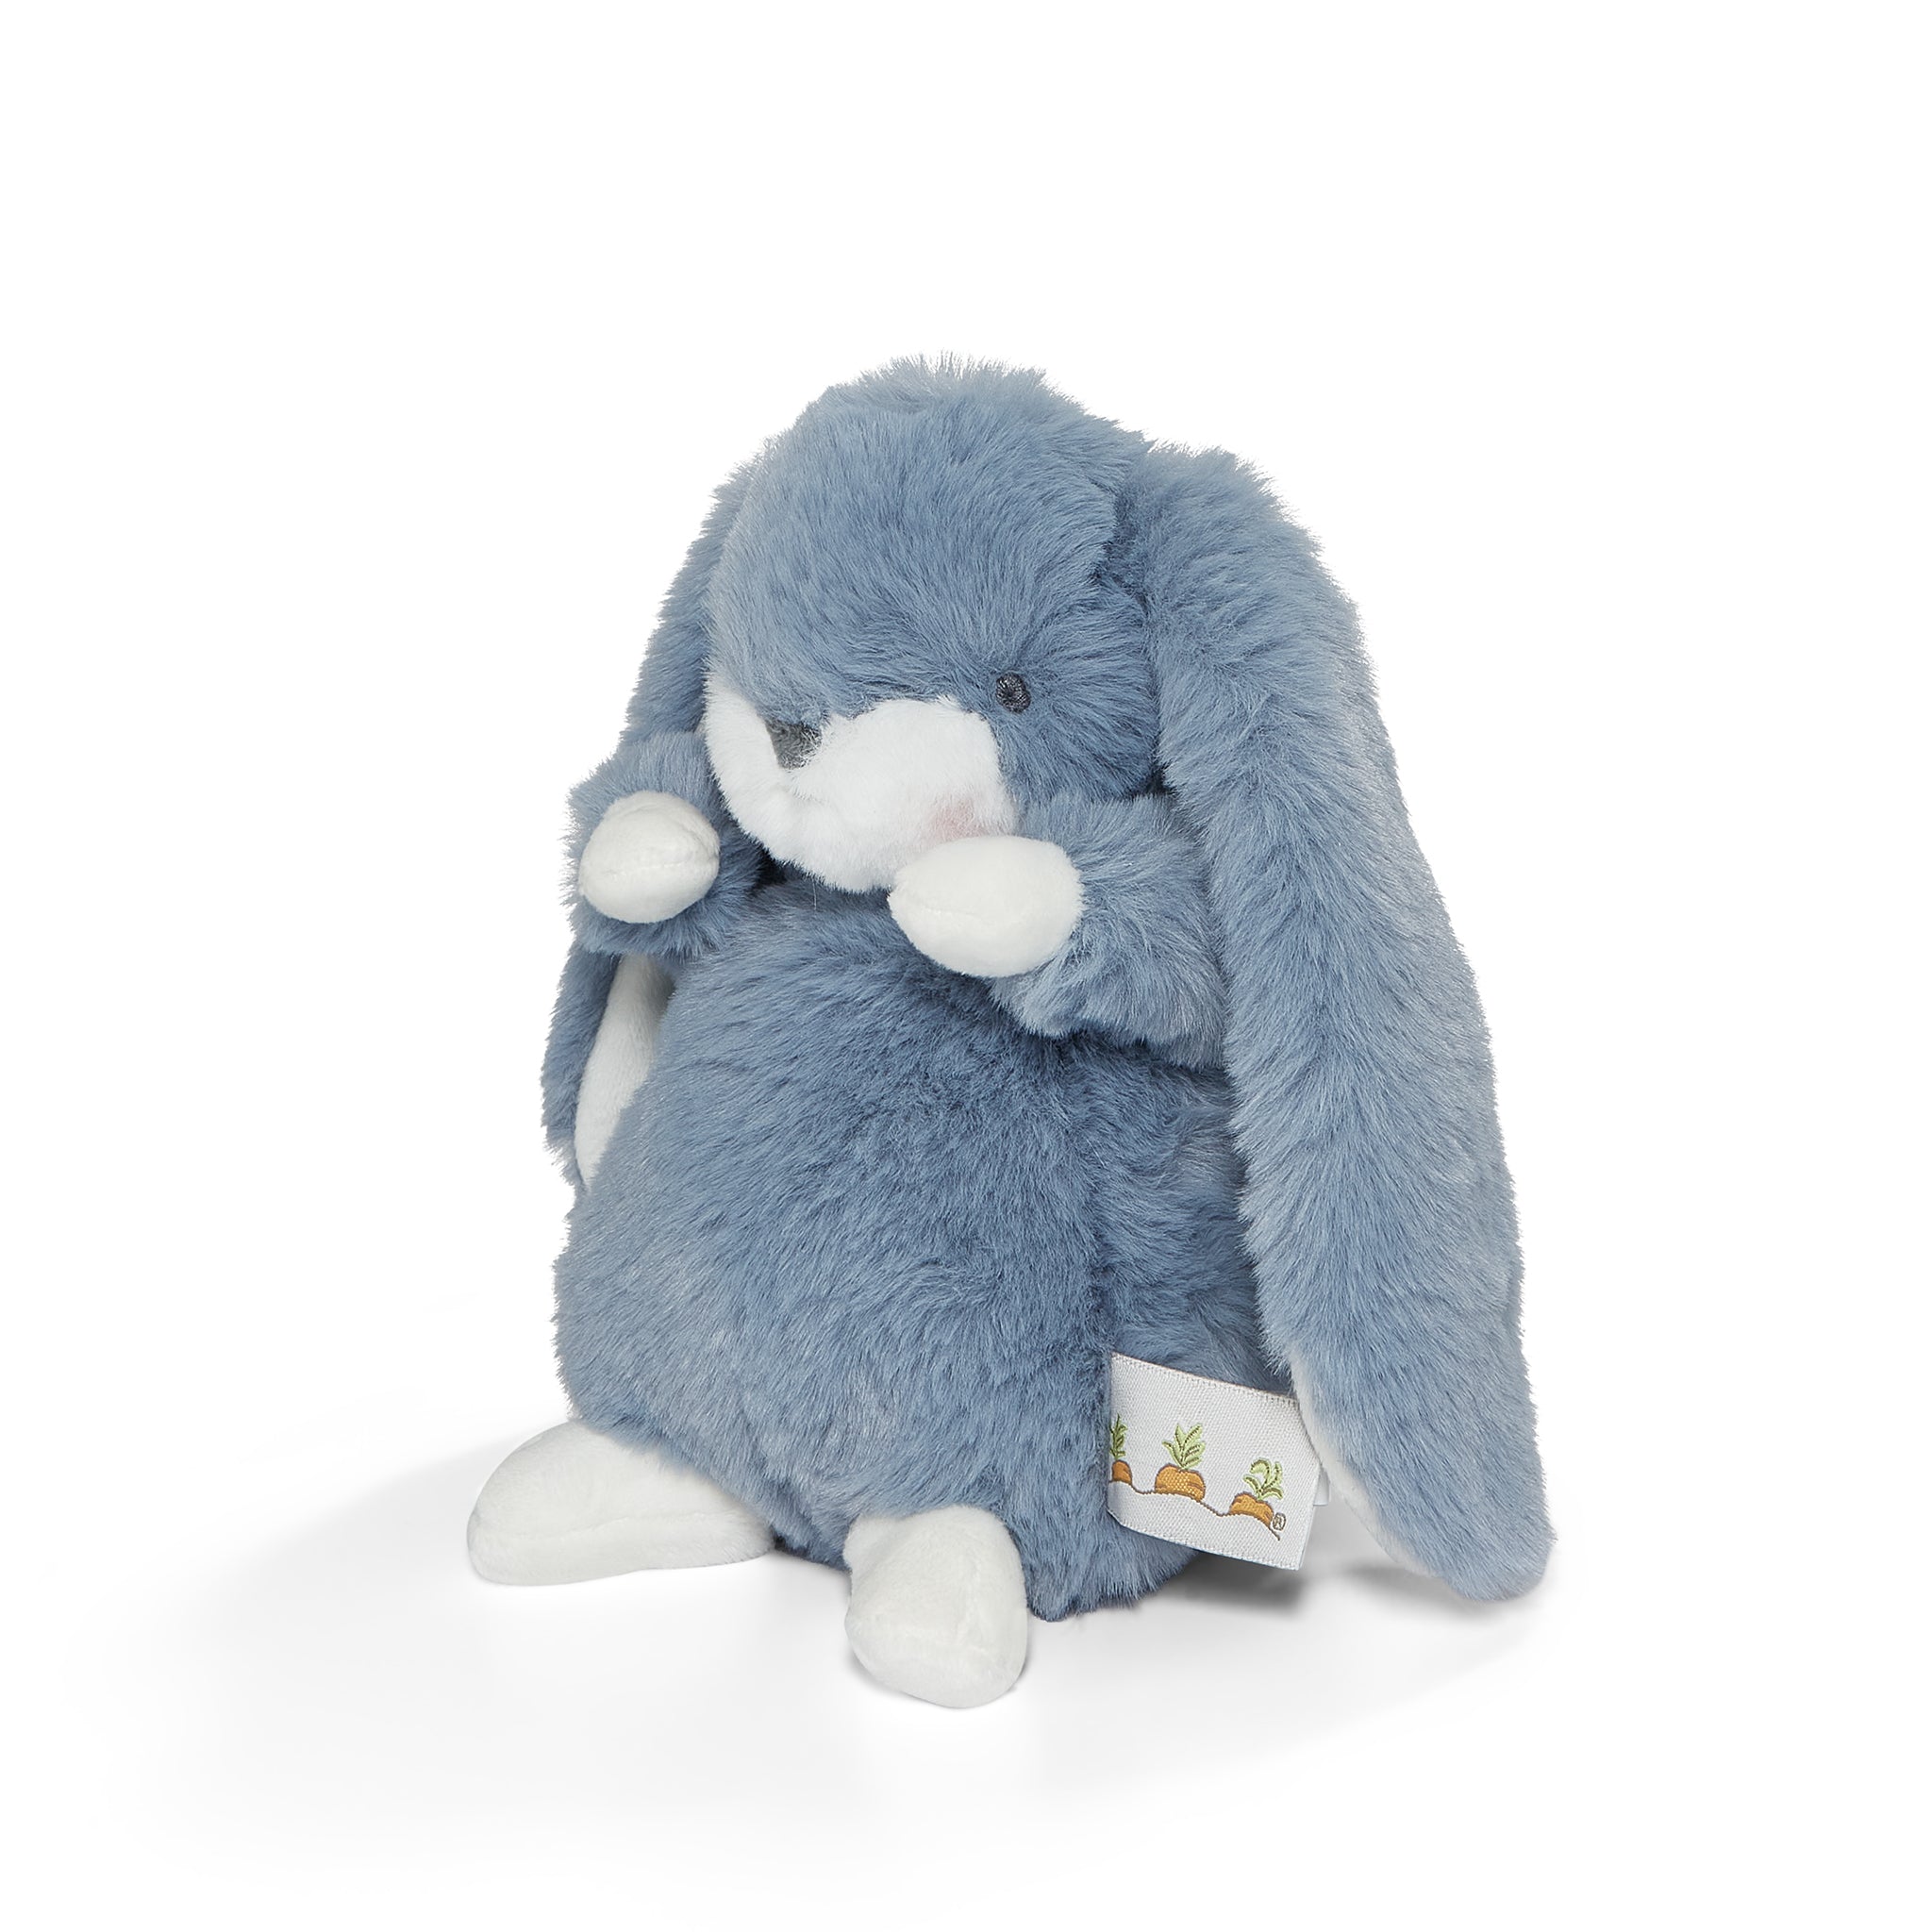 Tiny Nibble Bunny Blue - Lavender Lustre-Fluffle-SKU: 104391 - Bunnies By The Bay